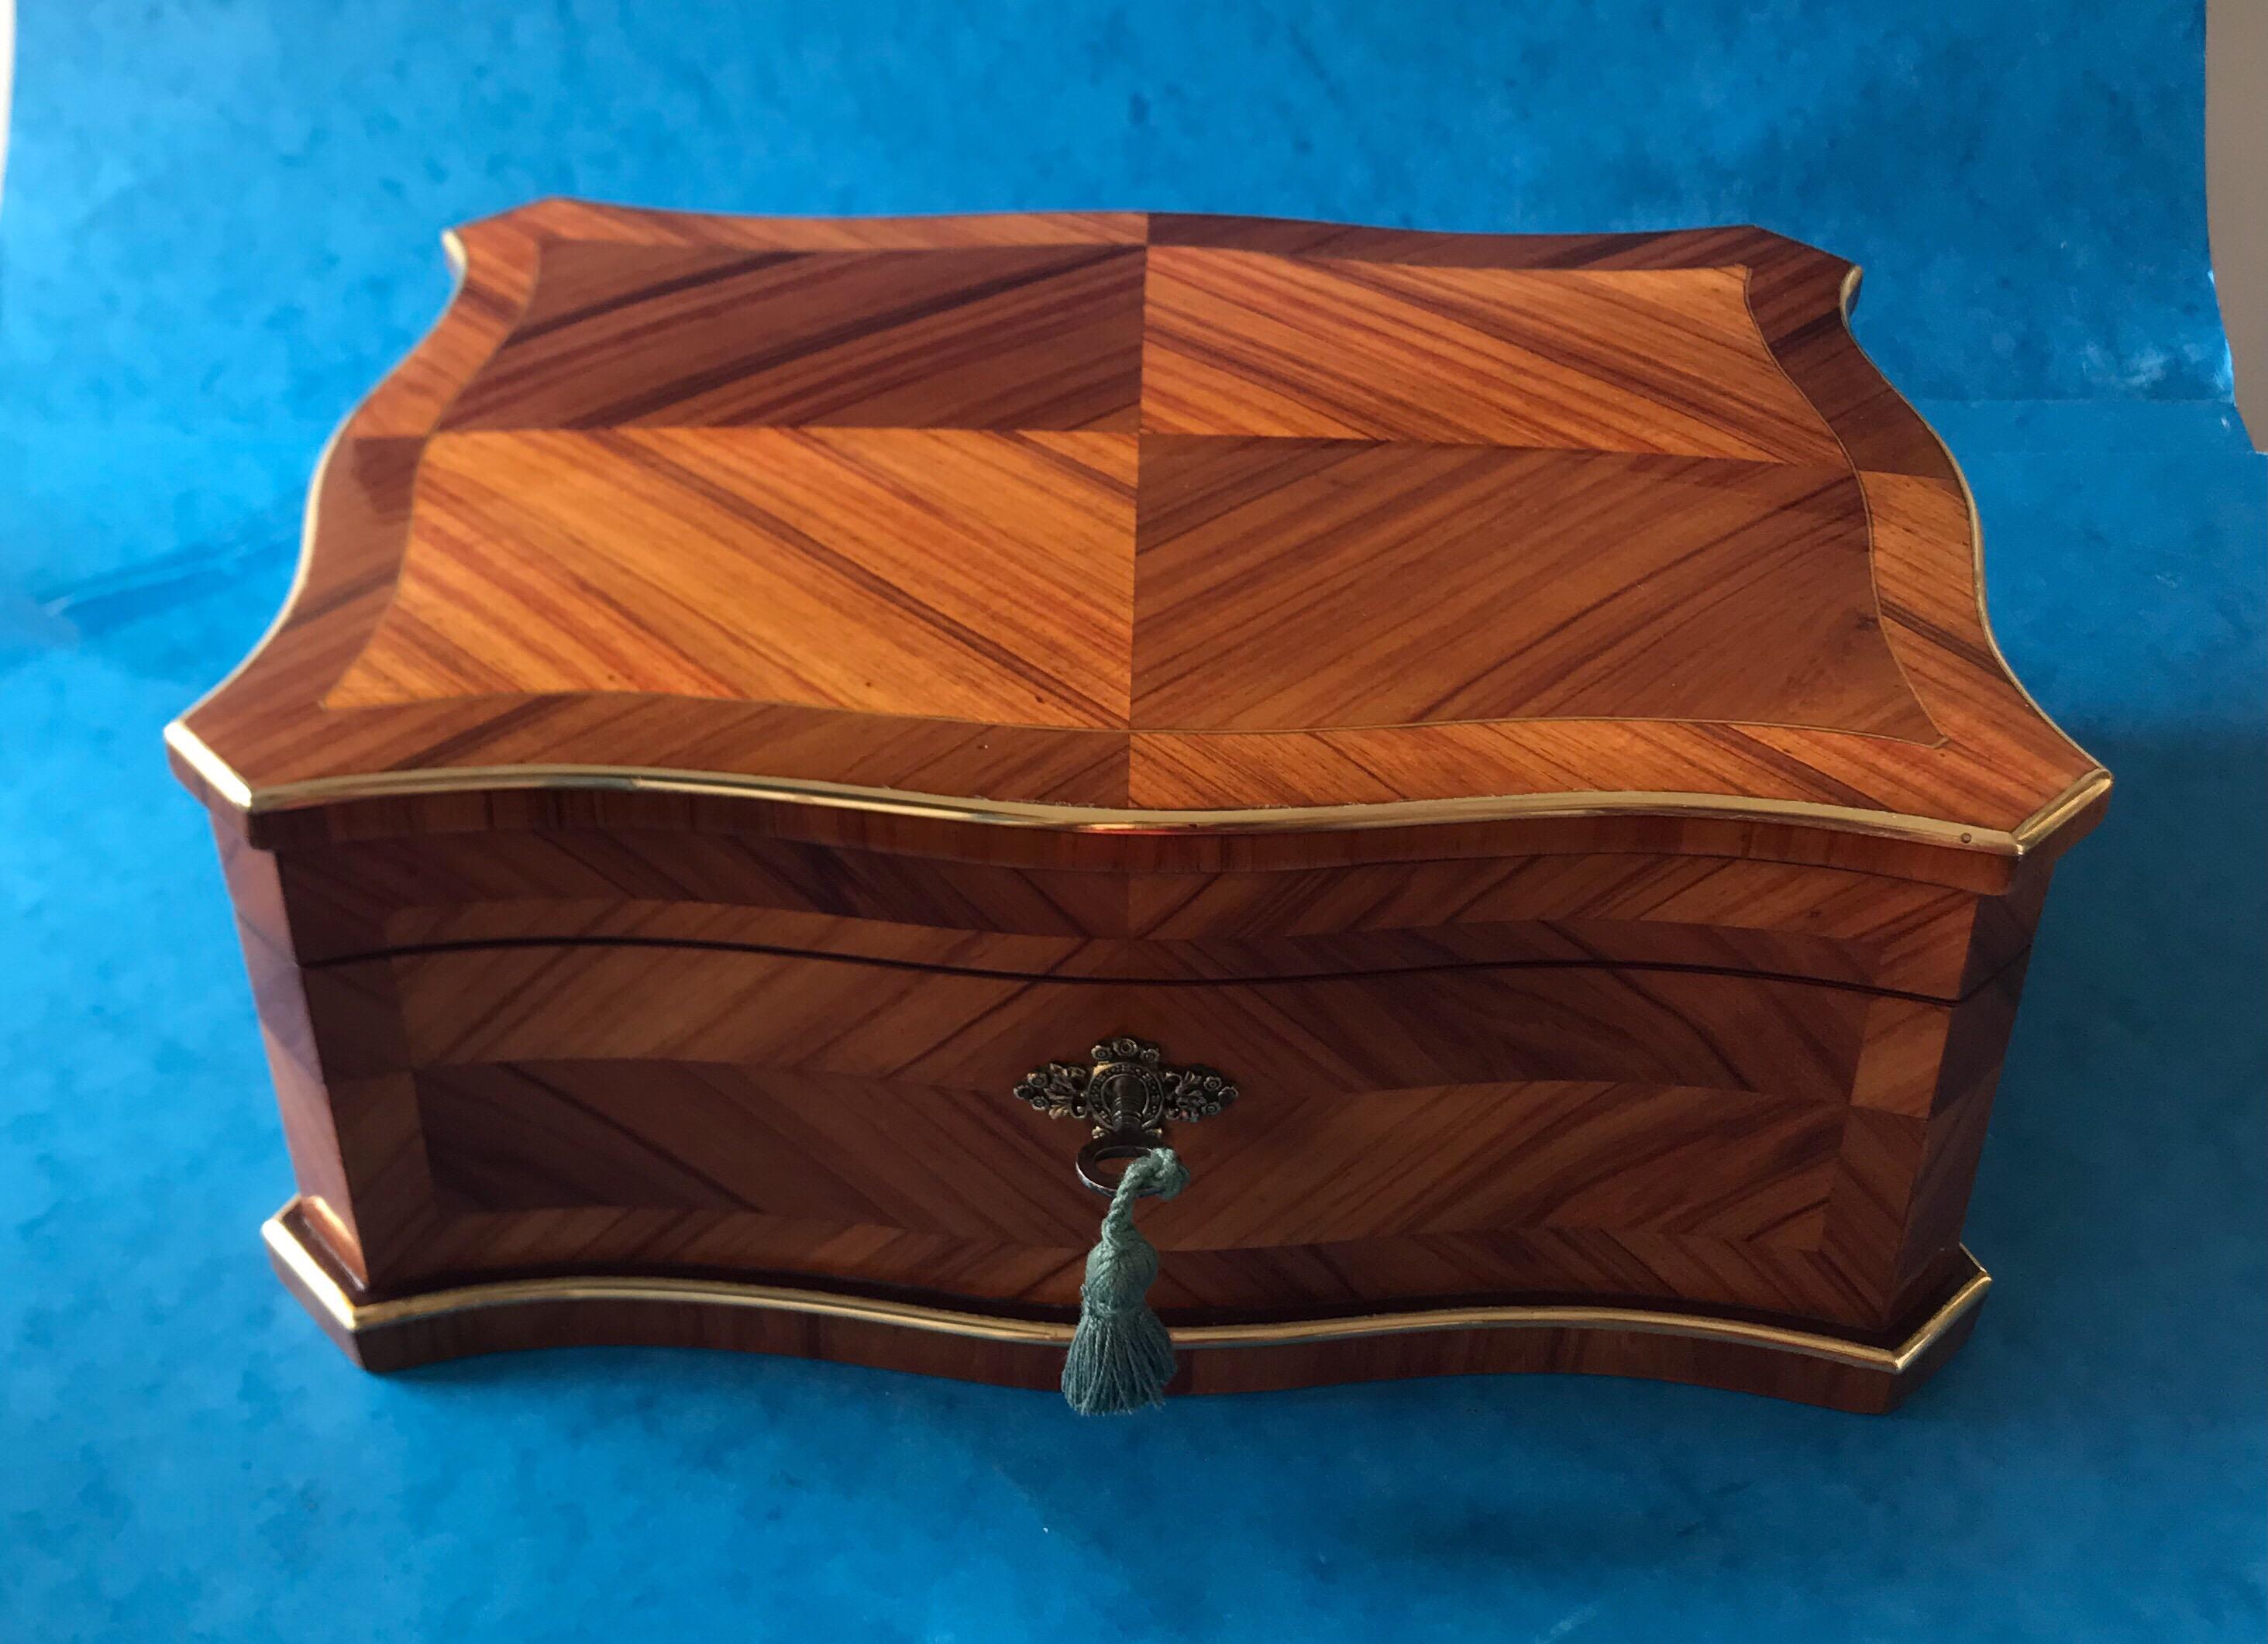 19th century French tulipwood box. The box is truly stunning but simple at the same time it’s in excellent condition. It dates back to circa 1850, it’s angle cut Tulipwood, the box has it’s original brass escutcheon with a rose design an d its